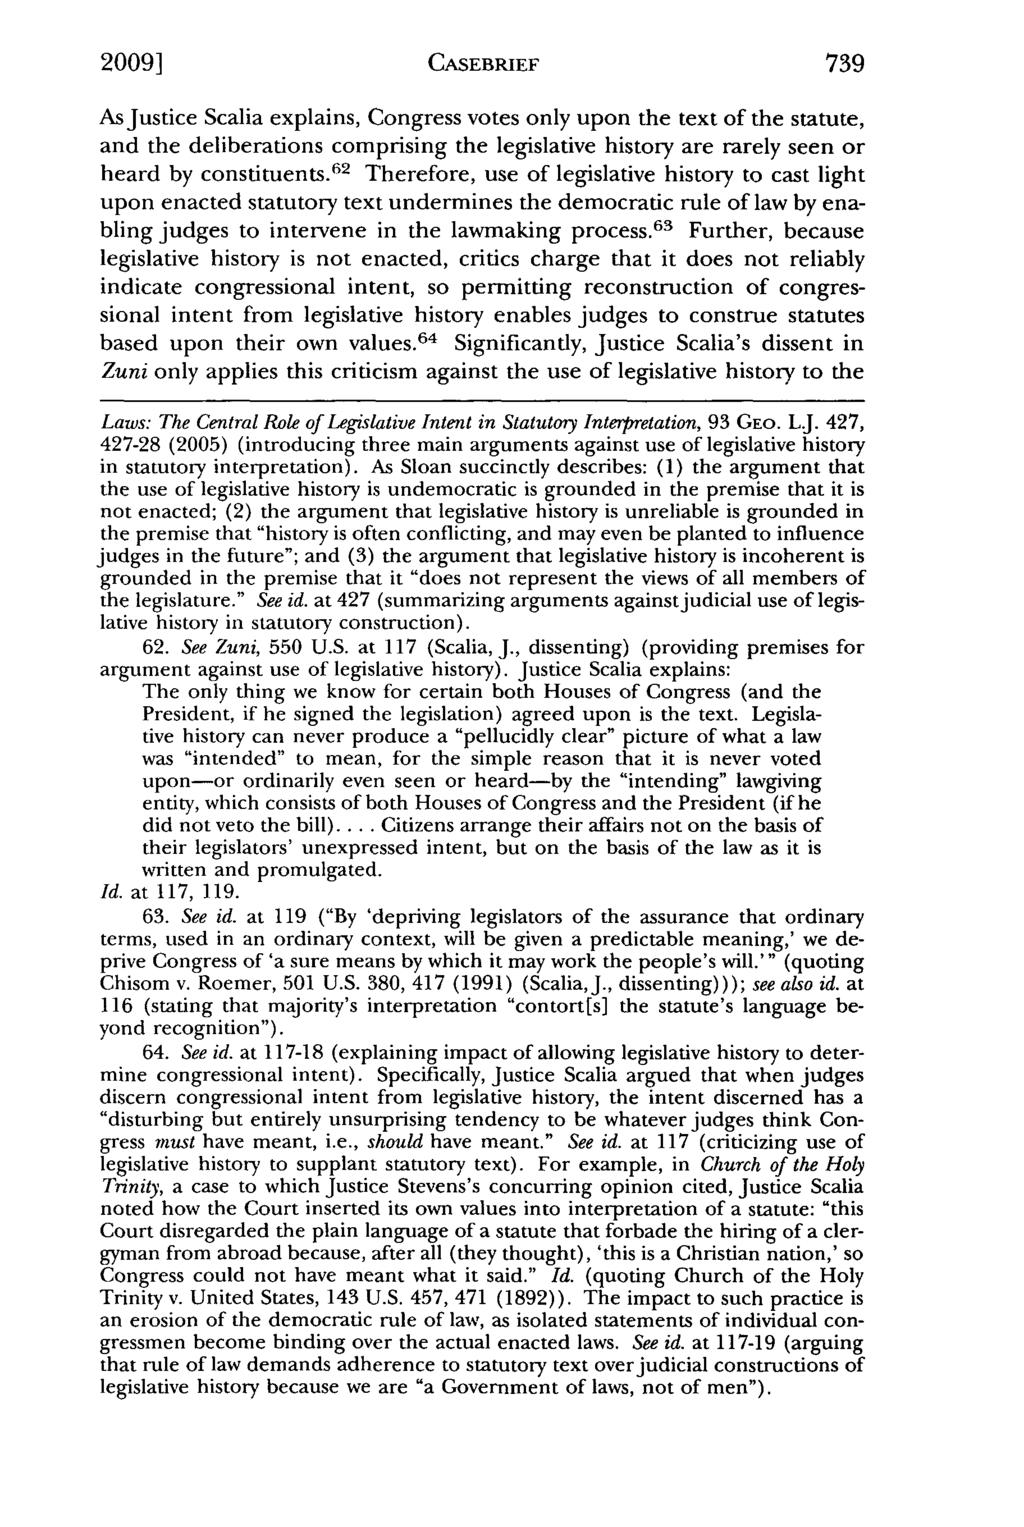 2009] Forte: May Legislative History Be Considered at Chevron Step One: The Th CASEBRIEF As Justice Scalia explains, Congress votes only upon the text of the statute, and the deliberations comprising